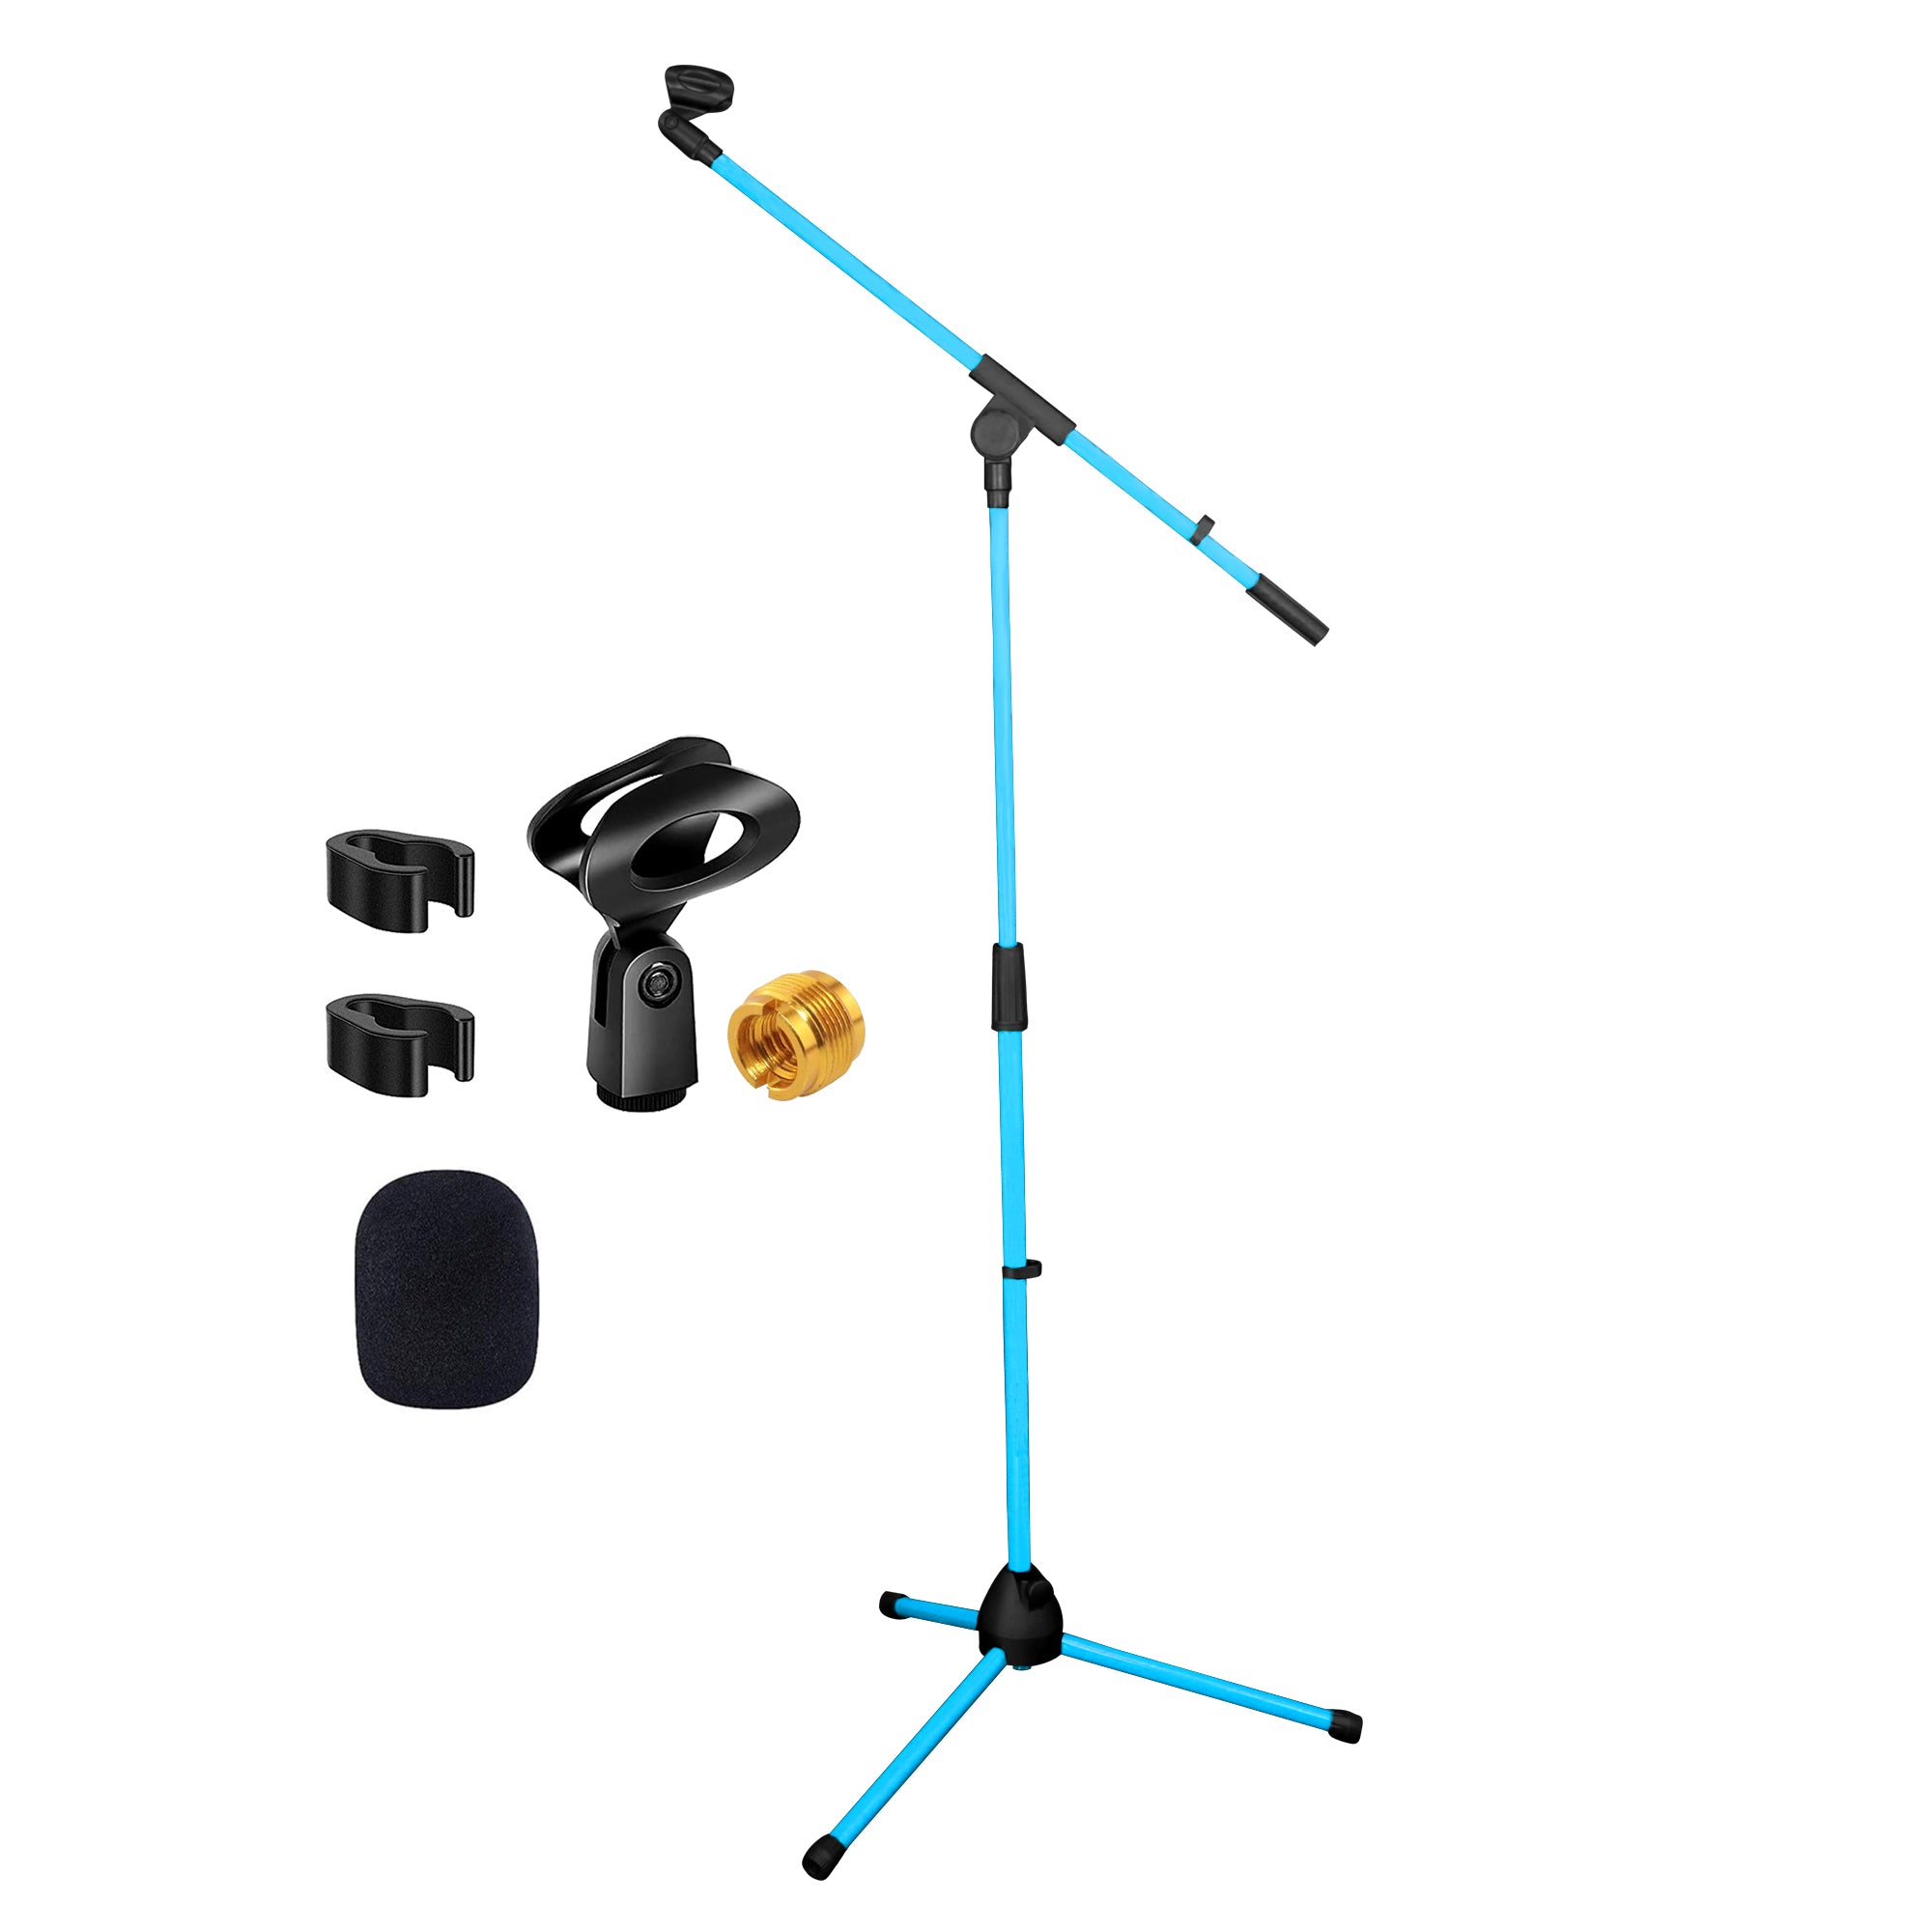 5 Core Mic Stand Sky Blue 1 Piece Collapsible Height Adjustable Up to 6ft Metal Microphone Tripod Stand w Boom Arm Para Microfono for Singing Karaoke Speech Stage Recording - MS 080 SKY BLU